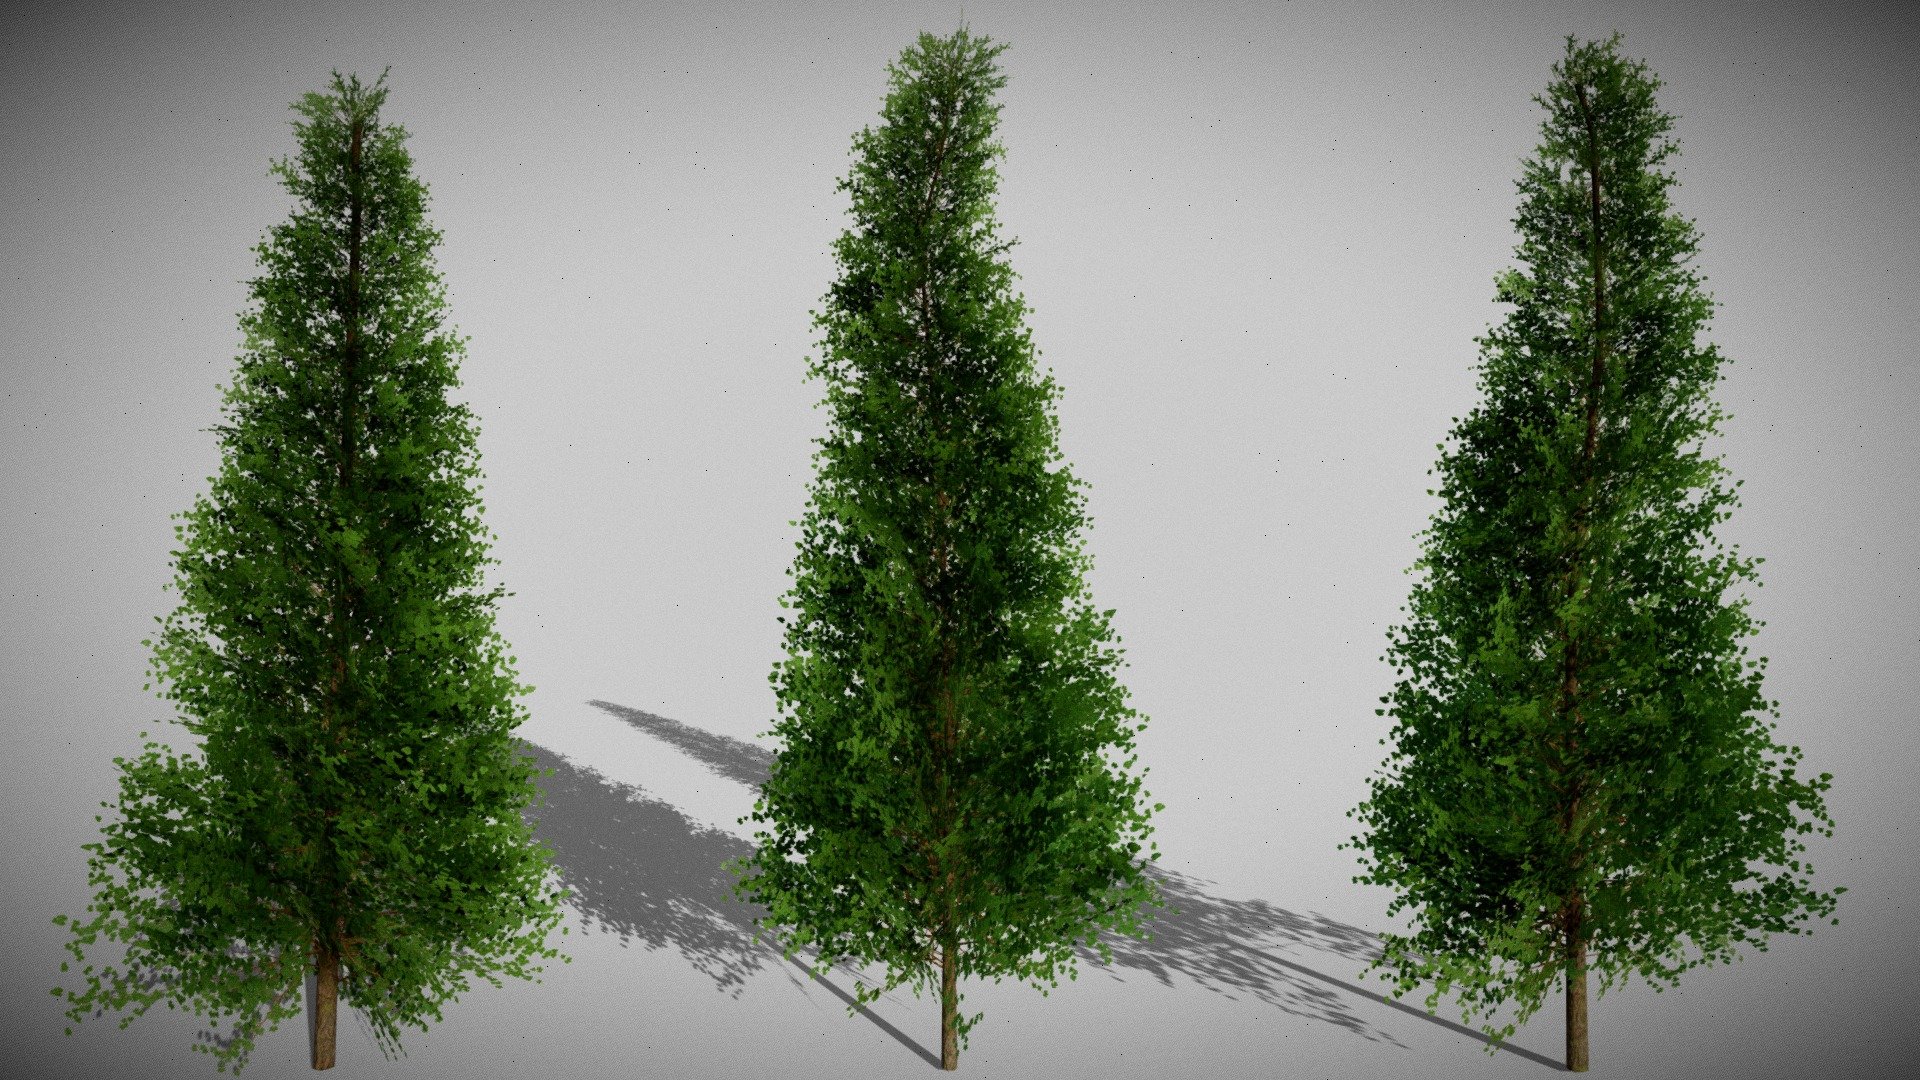 Low Poly Trees Free

Asset Pack Description:-



3 types of Low Poly Tree mesh

Textures Included in Blend File, You can extract them from unpacking the blend file

Textures List : Leaf Color Map,Normal Map and Opacity Map,Bark Color Map,Bark Normal Map,Bark Roughness Map, You can Use any Bark texture 

Technique Used: Opacity Masking

Trees can be Used in Games and Game Engines, Just Export them in any file format you want!




Additional Notes/Tips:-



All Trees have Poly Count Less than 1k

Use subsurface/Translucency with lighter shade of leaf Texture using Brightness/Contrast in shader editor.
Roughness map on Leaf not applicable use value 0-1 according to your requirements and use lower specular Value unless you want some shiny Leaves

Use Color variation with same Normal And Opacity Mask in Shader Editor.


Thank You! - Low Poly Trees Free - Download Free 3D model by Nicholas-3D (@Nicholas01) 3d model